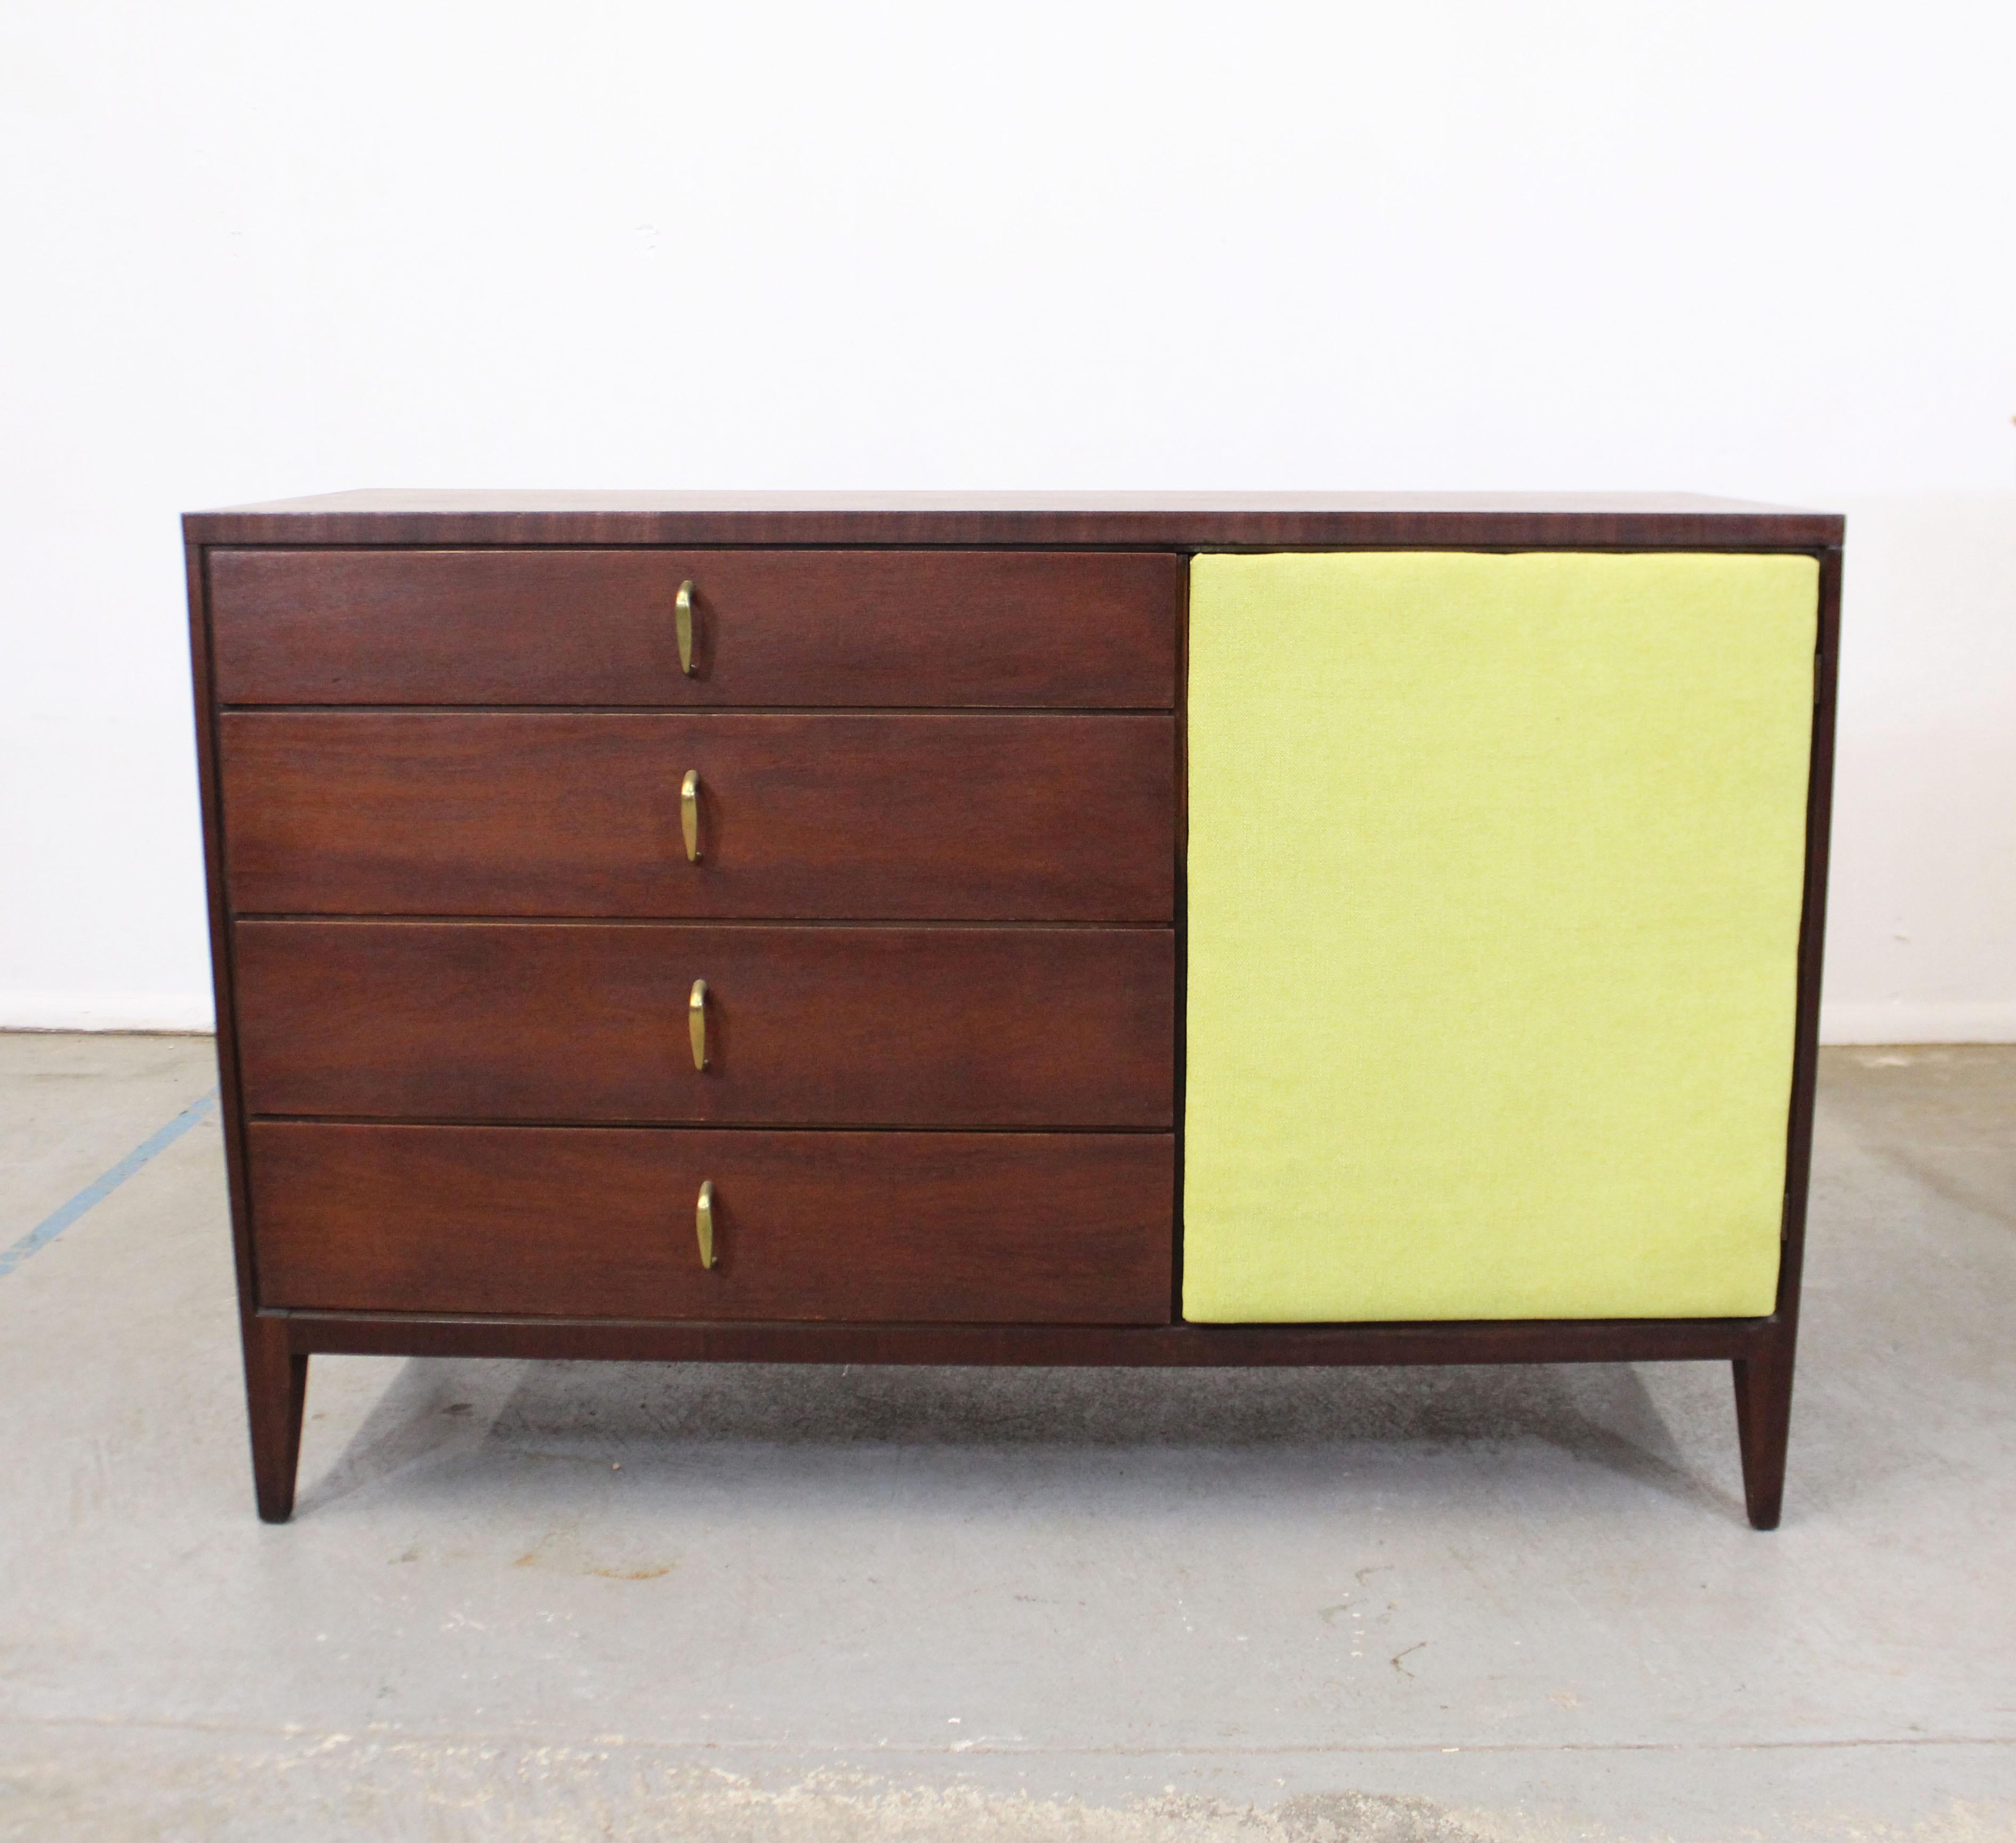 Offered is a vintage Mid-Century Modern credenza. This is a beautiful mahogany credenza with a walnut stain that features an upholstered, magnetized push door. Has adjustable inner-shelving and four dovetailed drawers with brass pulls. It's in very